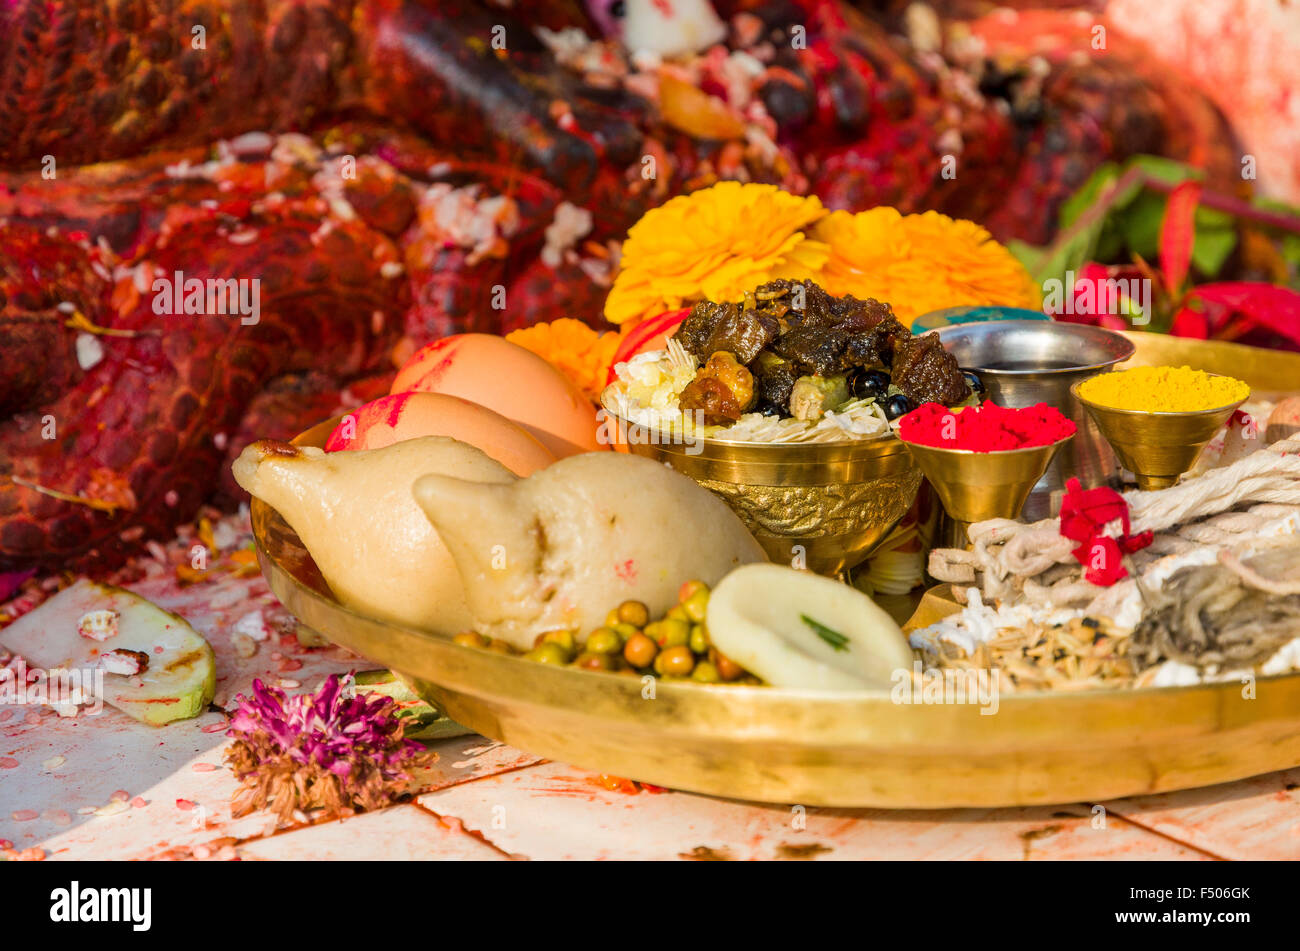 Flowers, food, colorpowder, eggs and candles as offerings to the Gods on a metal plate Stock Photo